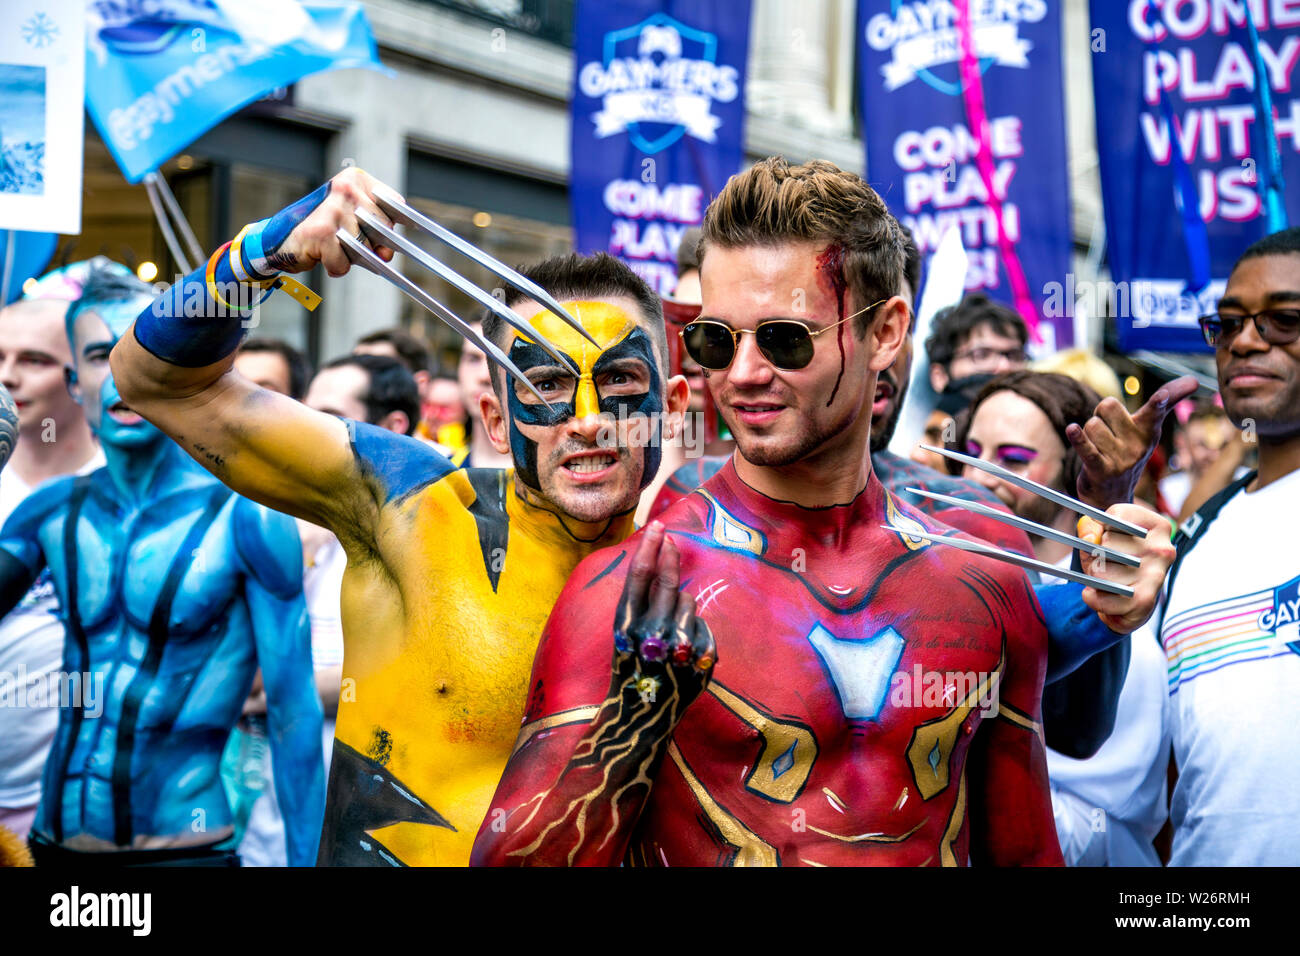 6 July 2019 - Two men dressed up as Wolverine and Iron Man at London Pride Parade, UK Stock Photo